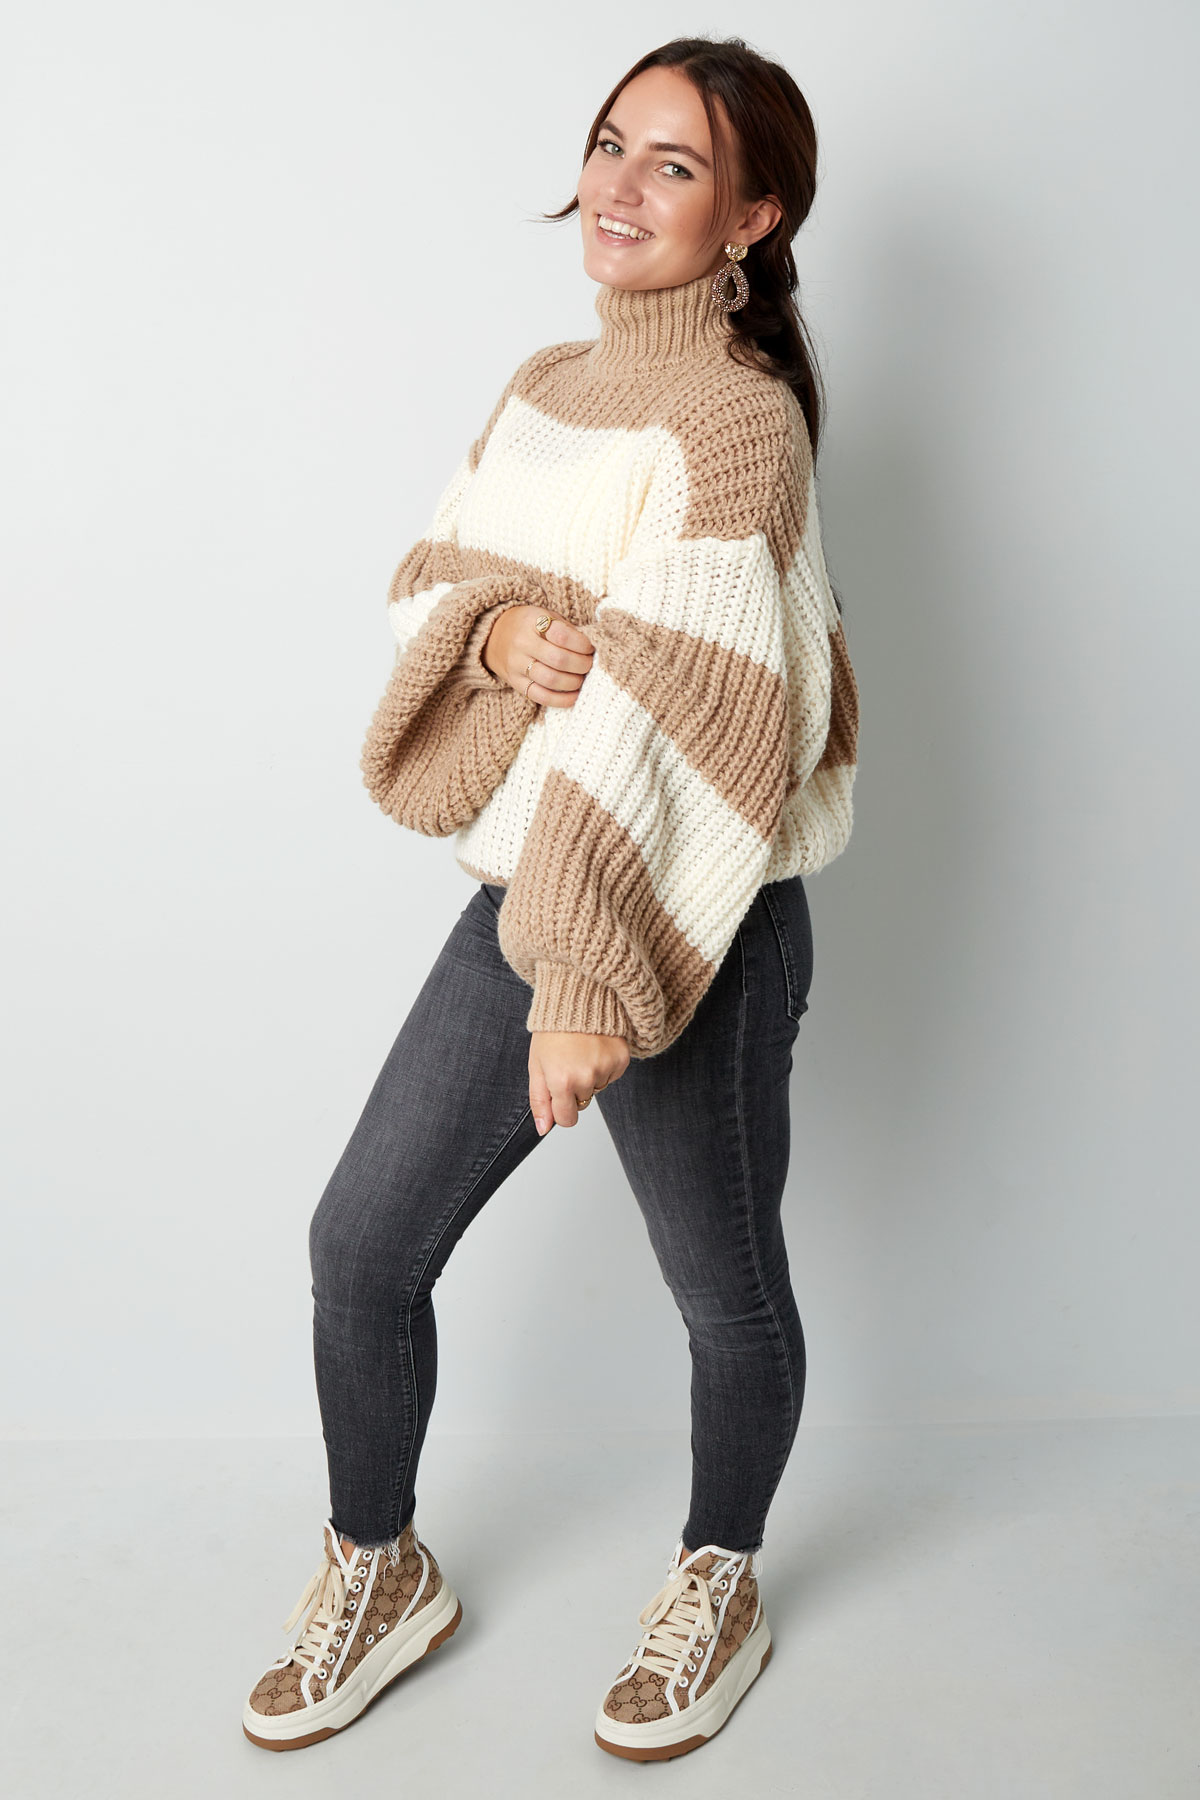 Warm knitted striped sweater - black and white Picture4